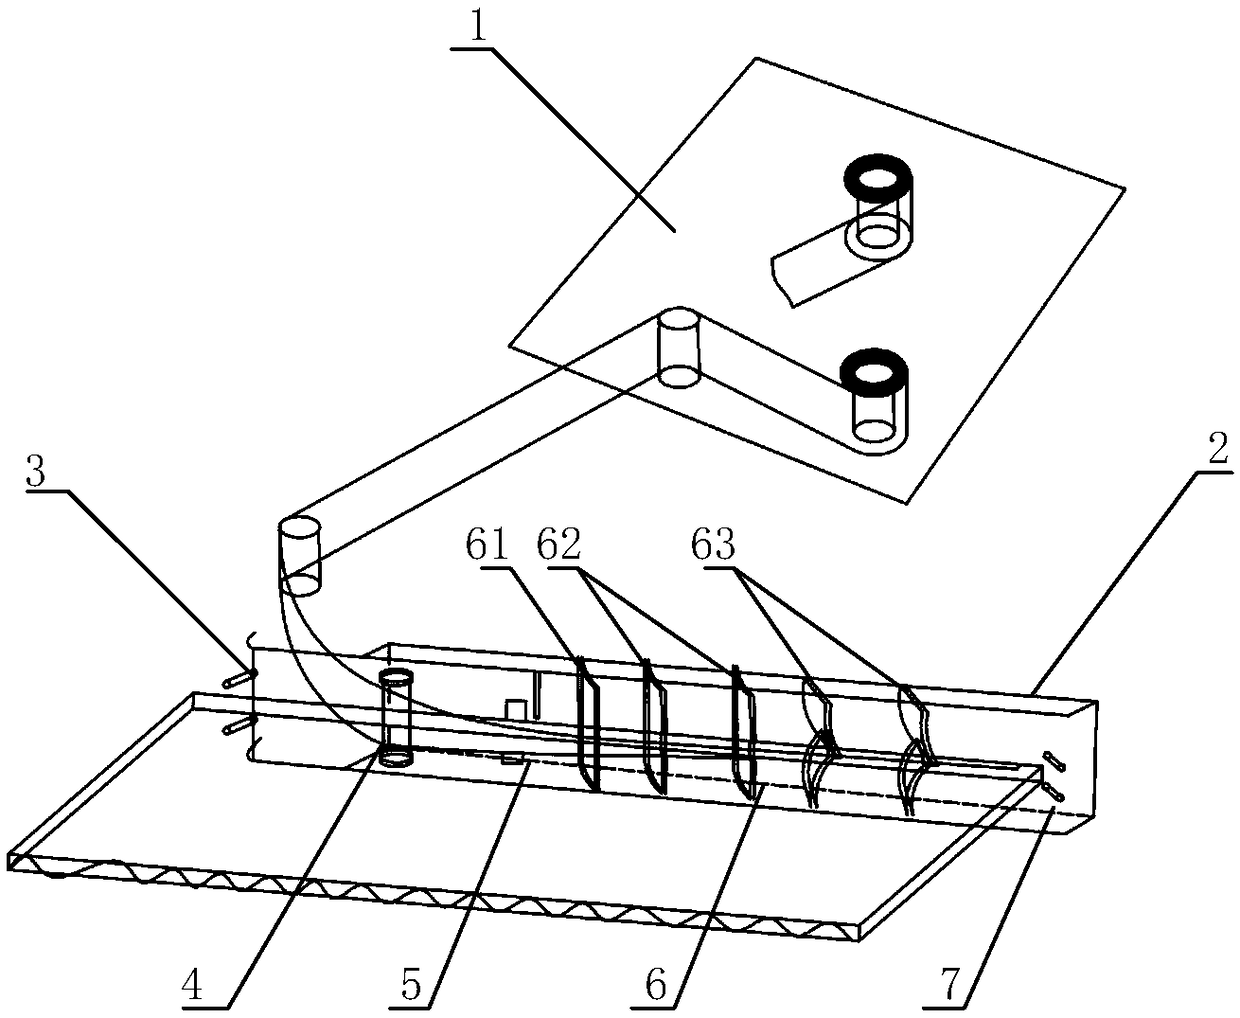 Corrugated line automatic guiding and pasting edge banding equipment and its application method